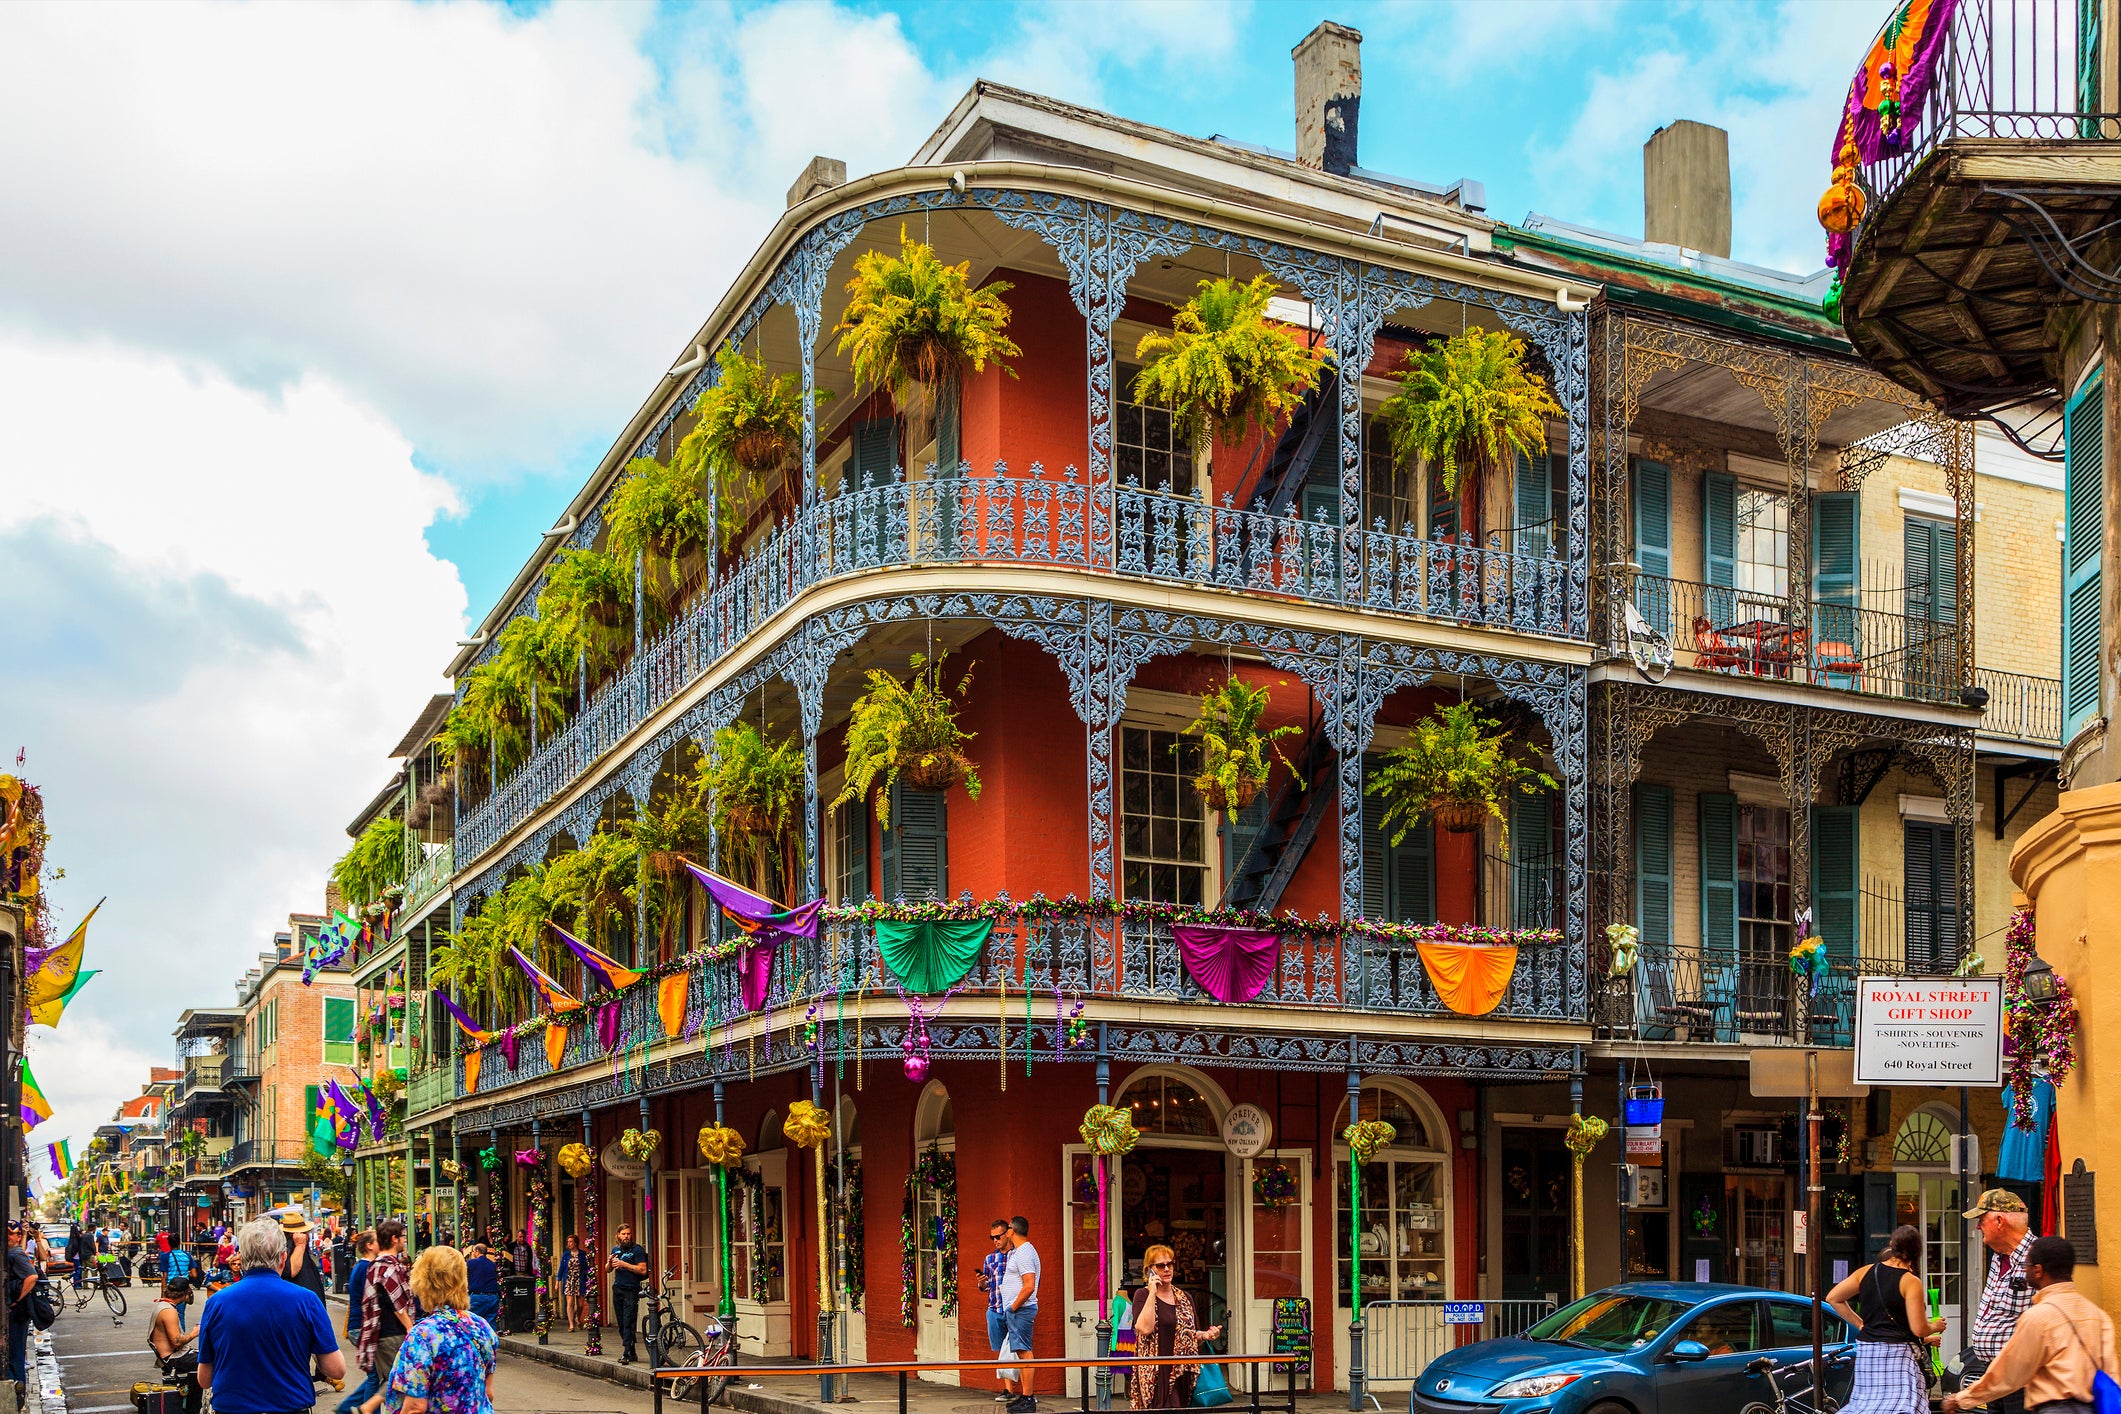 New Orleans French Quarter is famous for its history, music and Mardis Gras celebrations